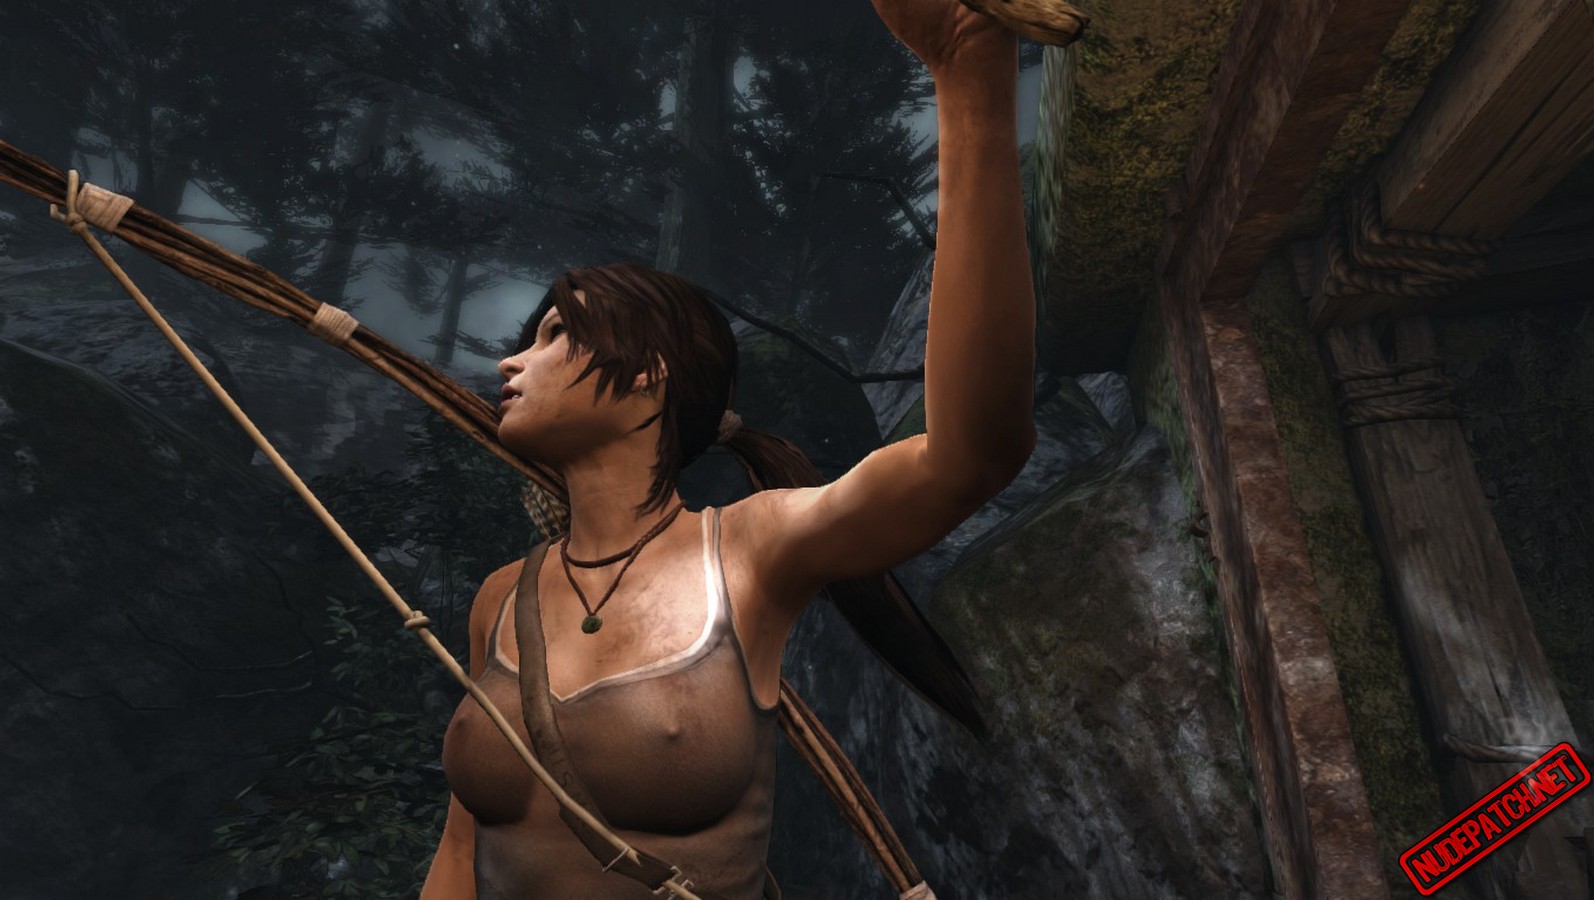 adnan akhter recommends sexy lara croft naked pic